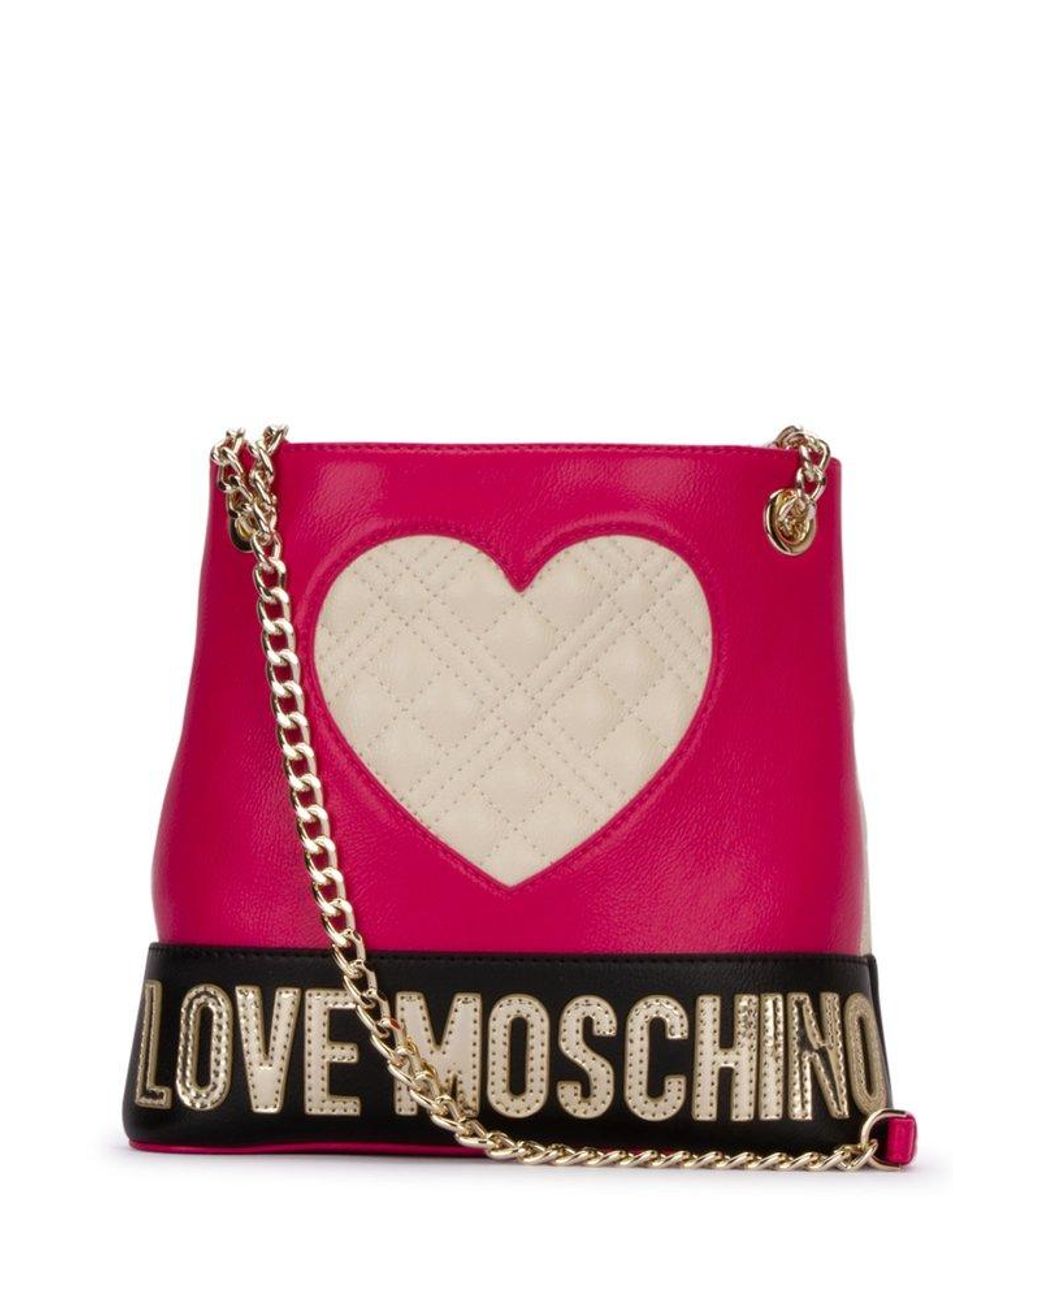 Love Moschino Heart Quilt Shoulder Bag in Natural